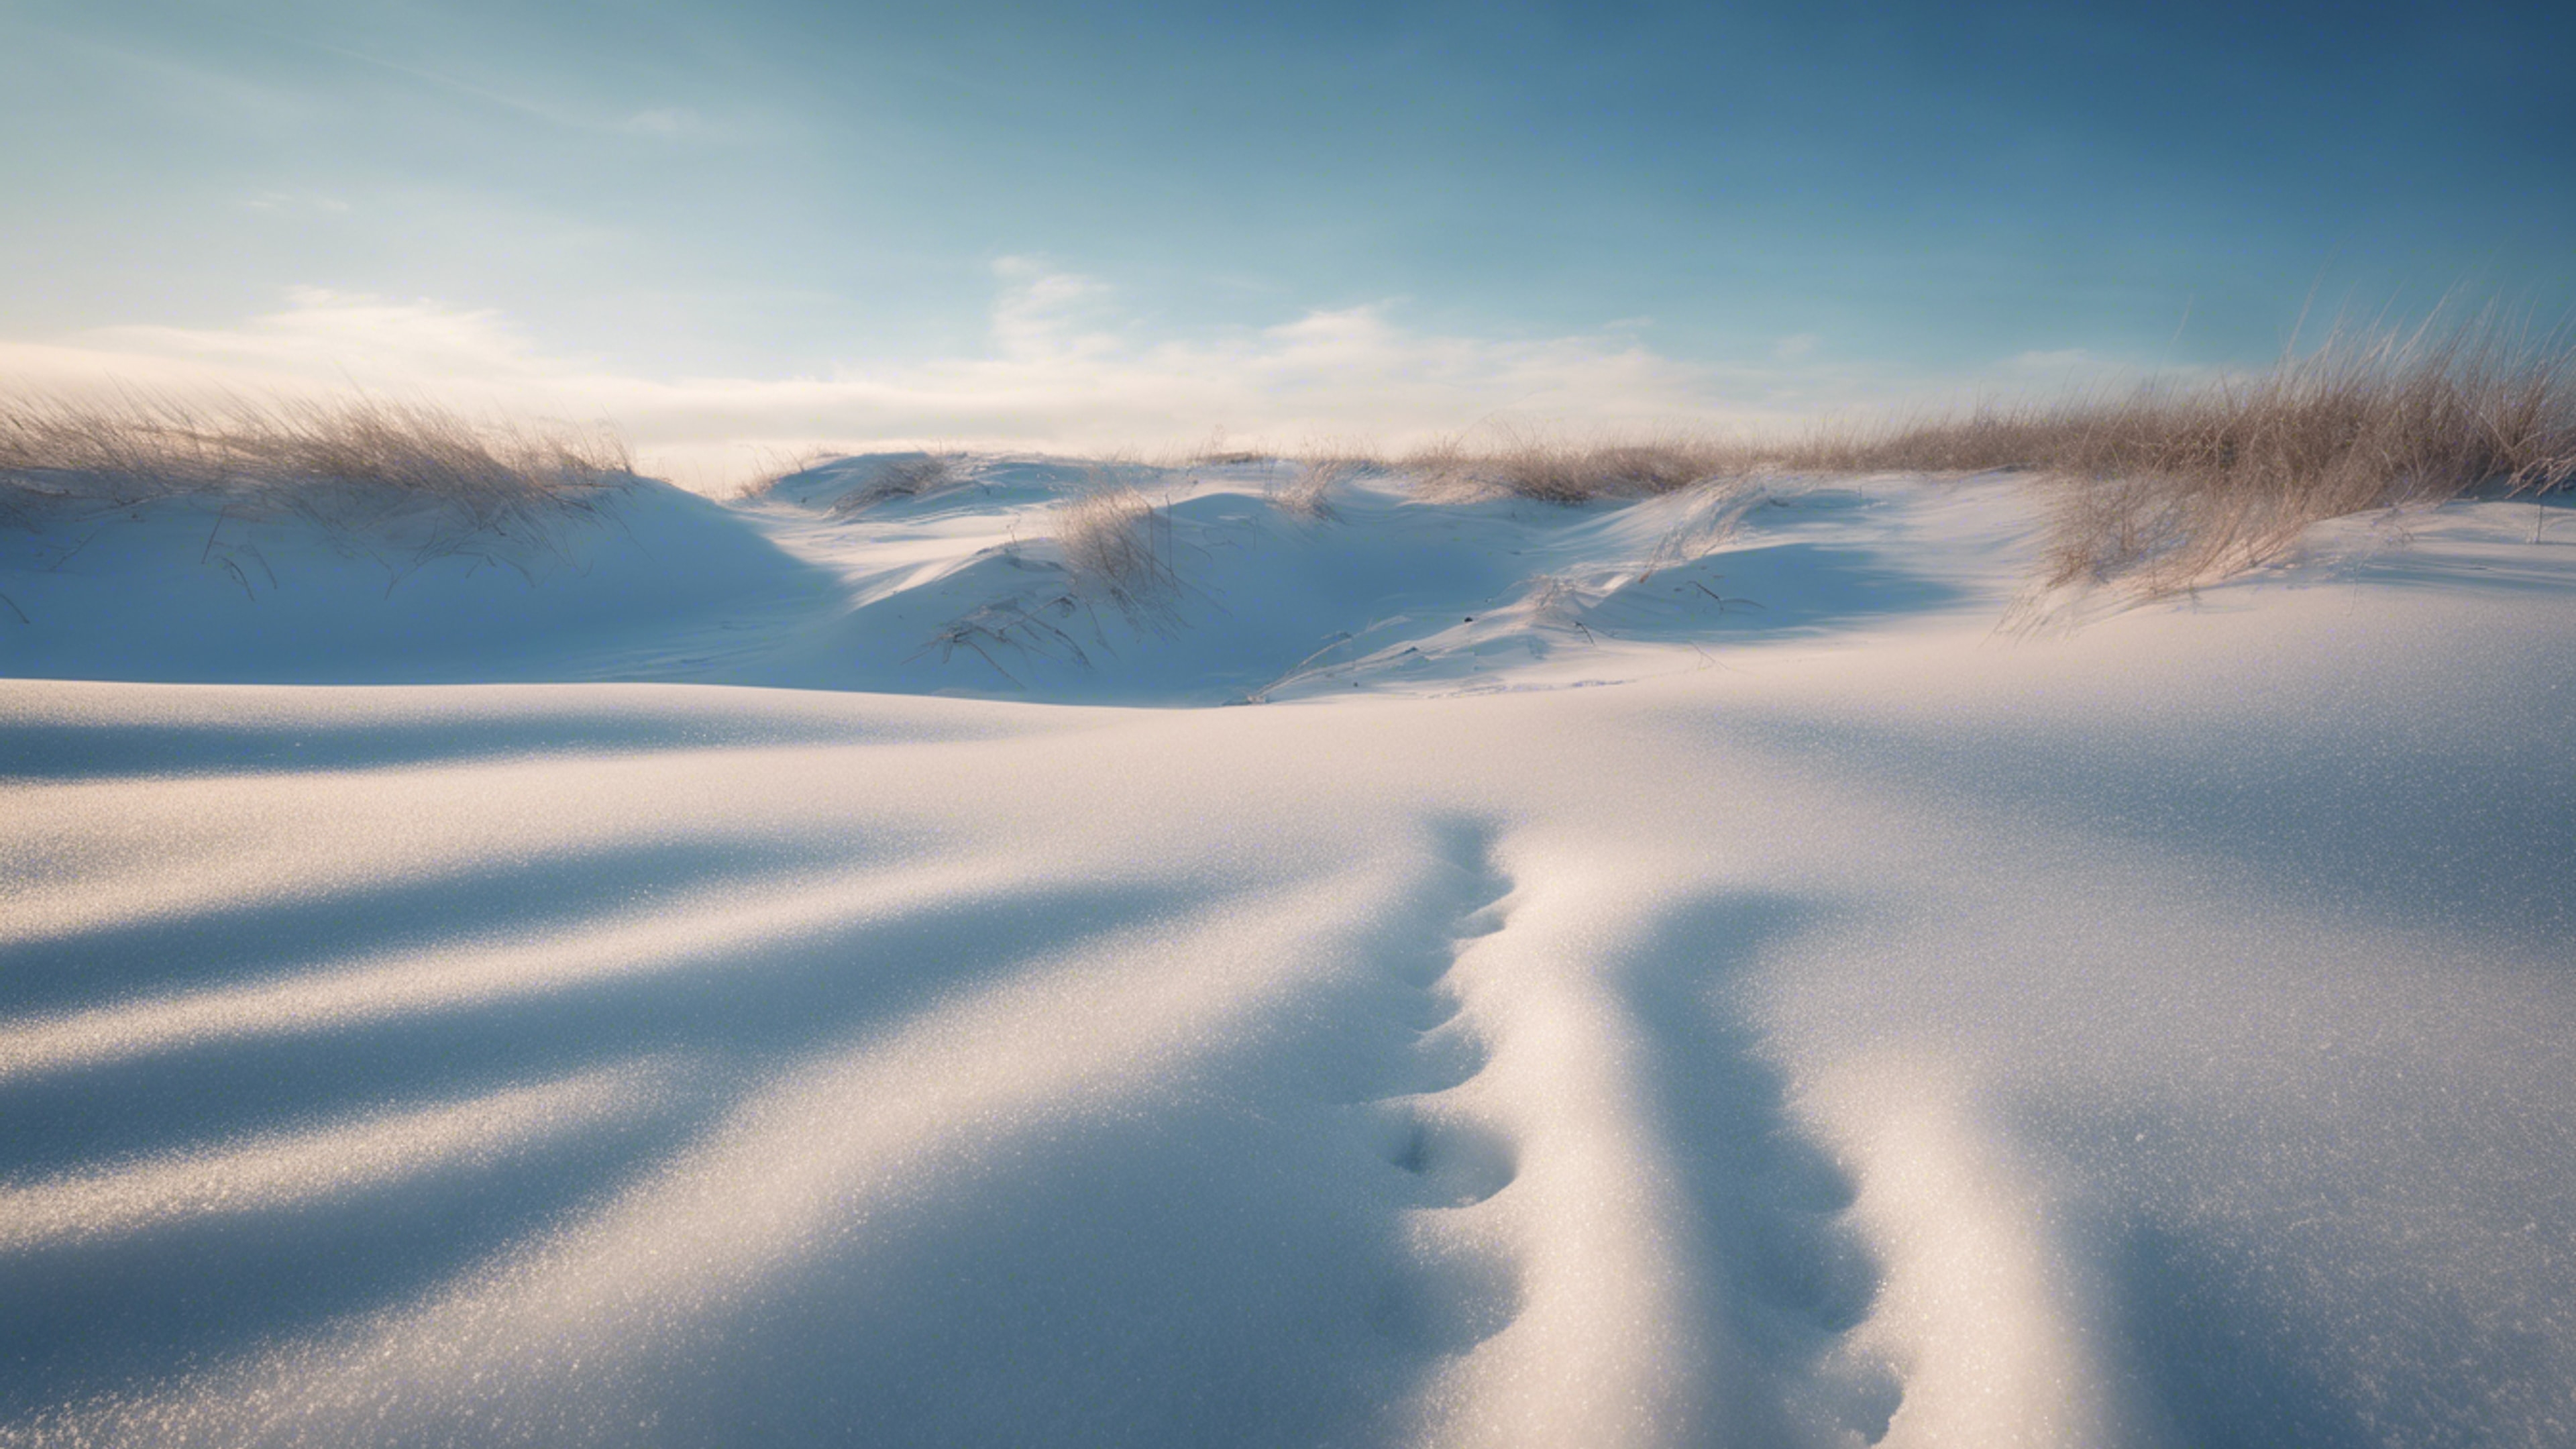 Wind-swept snow dunes under the icy blue winter sky, reflecting the beauty of harsh winters. Wallpaper[319e4af3da1b45239bcc]